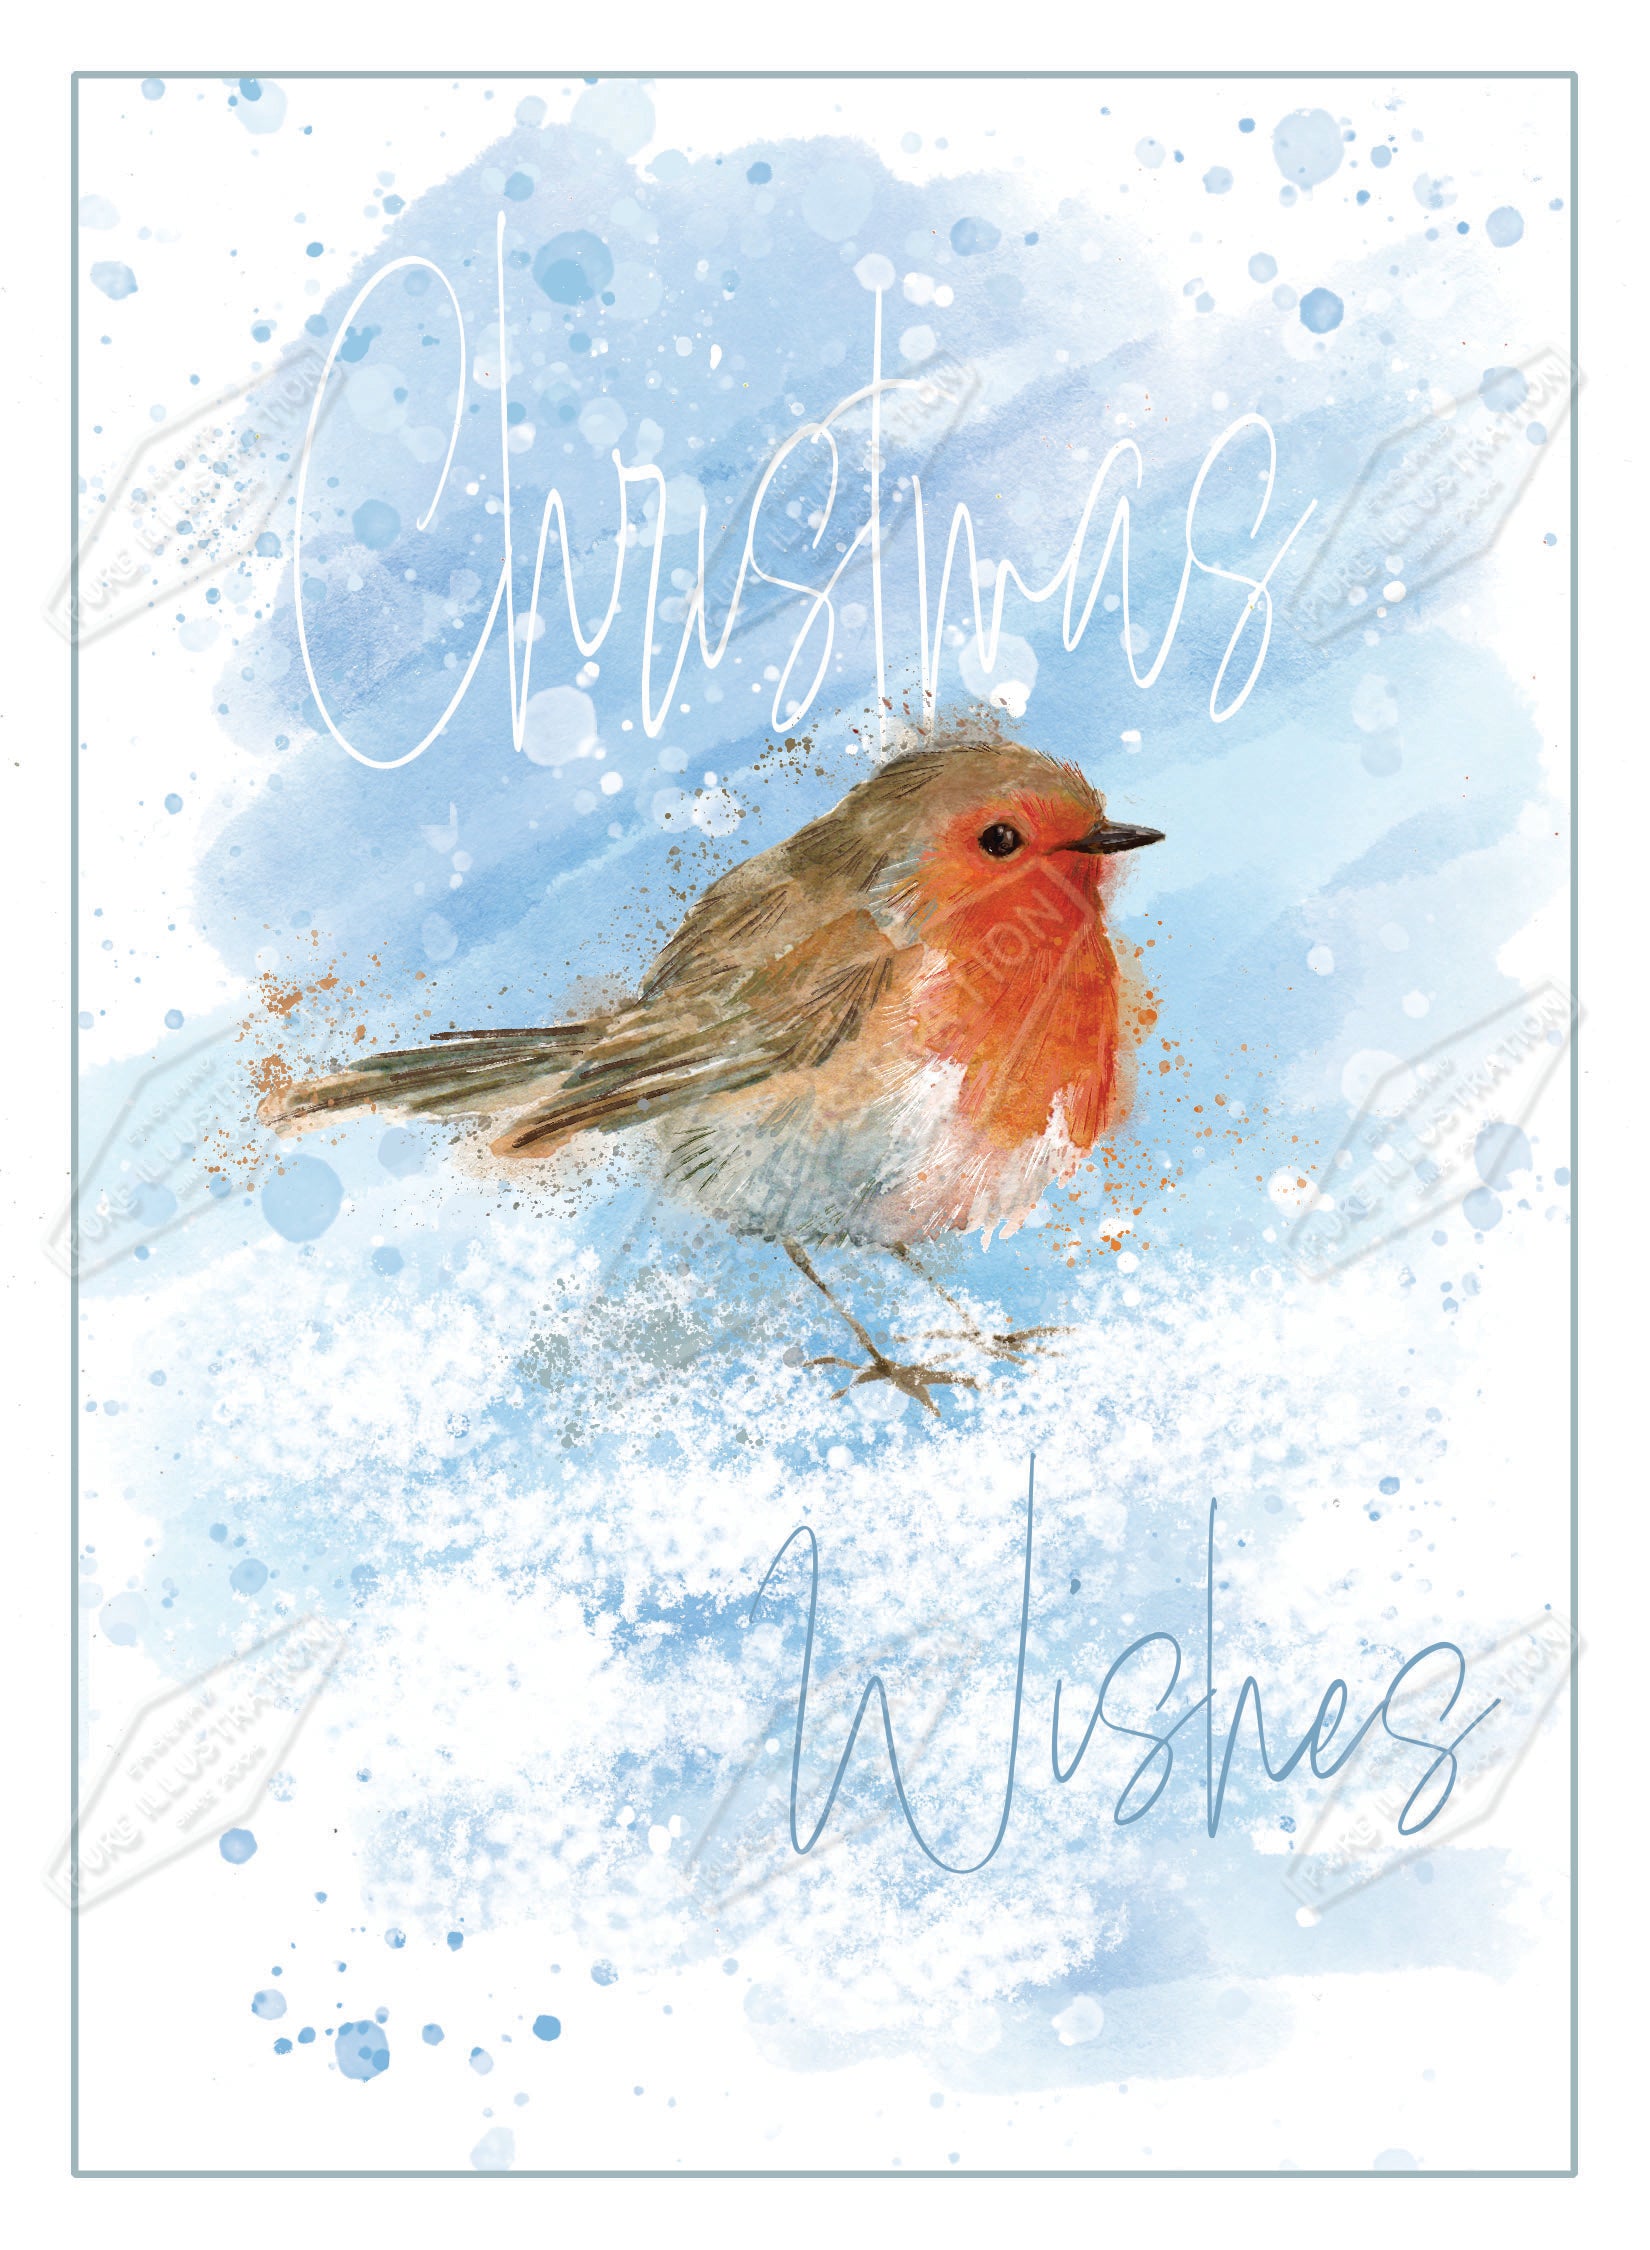 00035986AMA - Ally Marie is represented by Pure Art Licensing Agency - Christmas Greeting Card Design